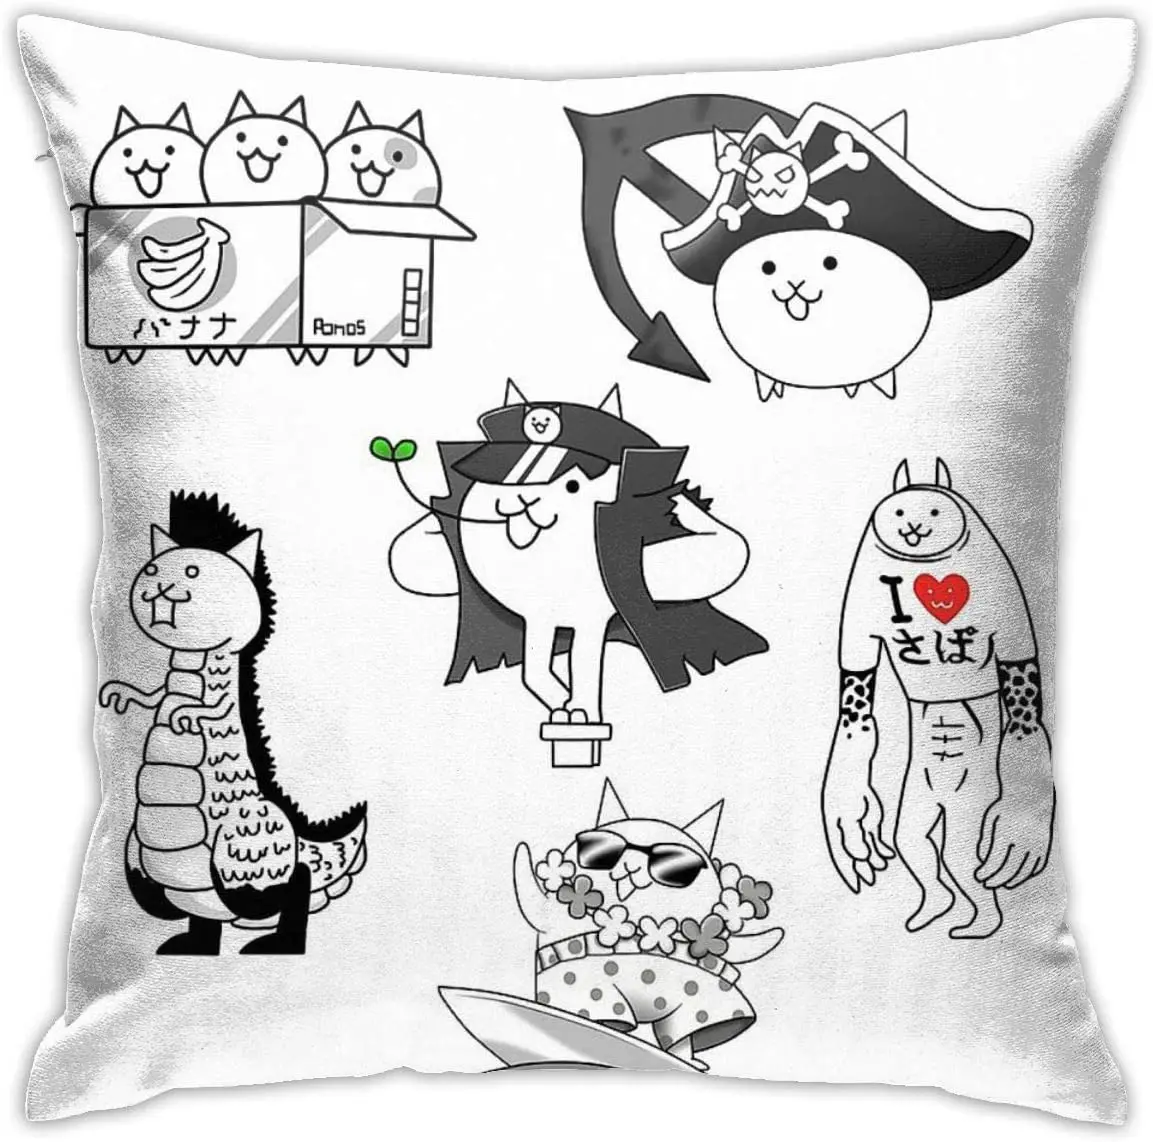 

Battle Cats Bedroom Couch Sofa Square Pillow Case Home Decorative Throw Pillow Covers 18x18 Inch